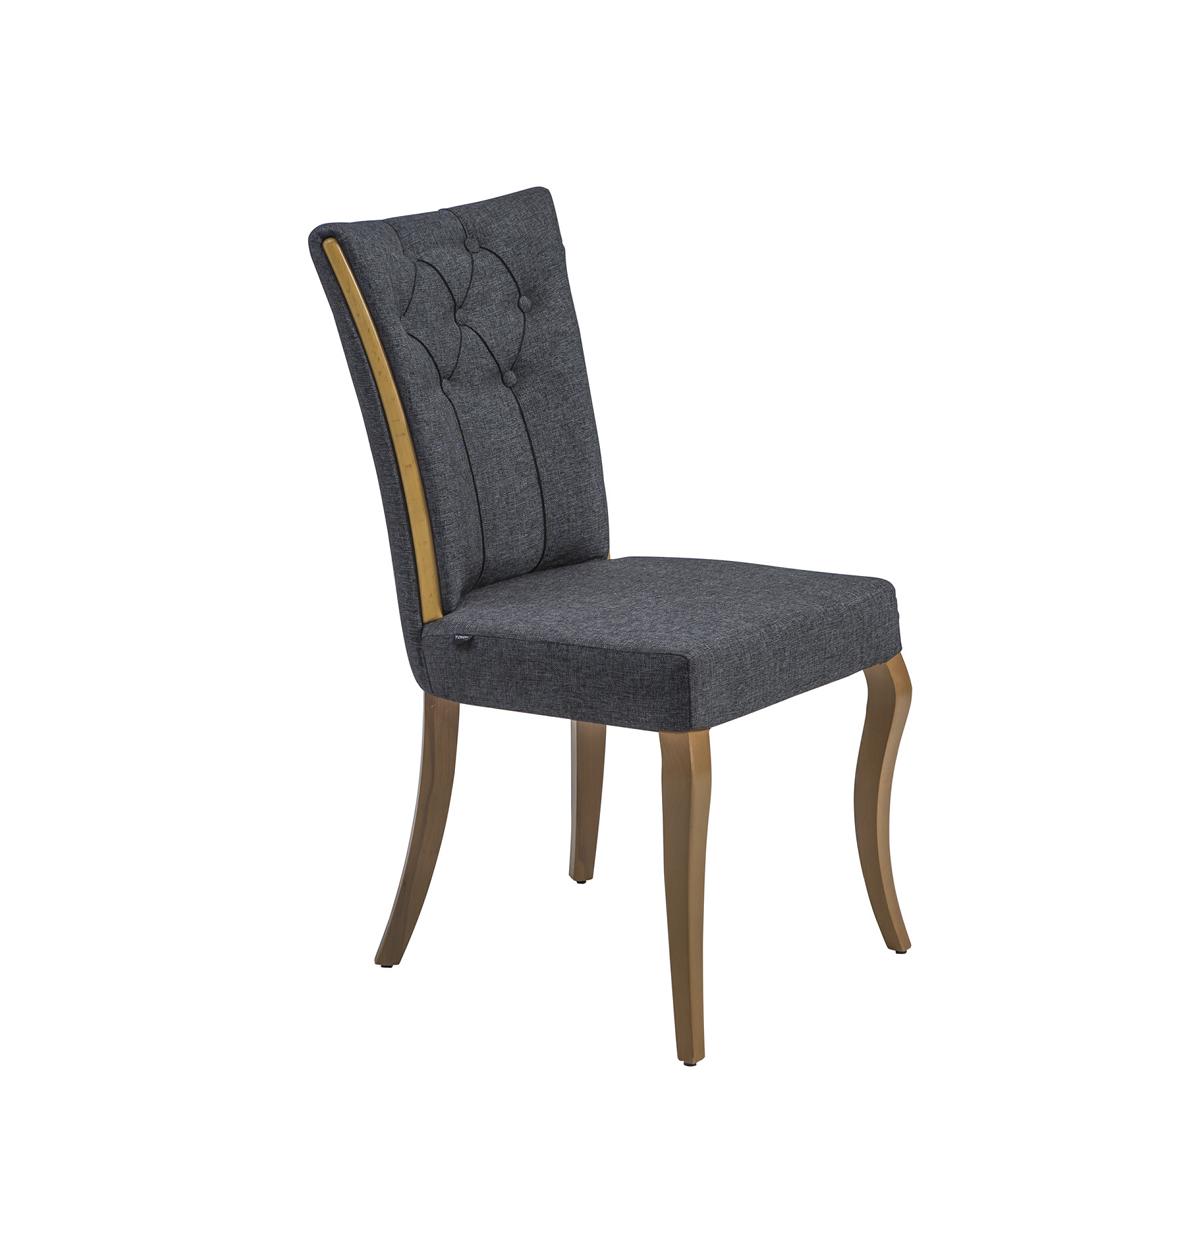 Luxury Dining Room Furniture Designer Gray Chair New Furniture Modern Chairs